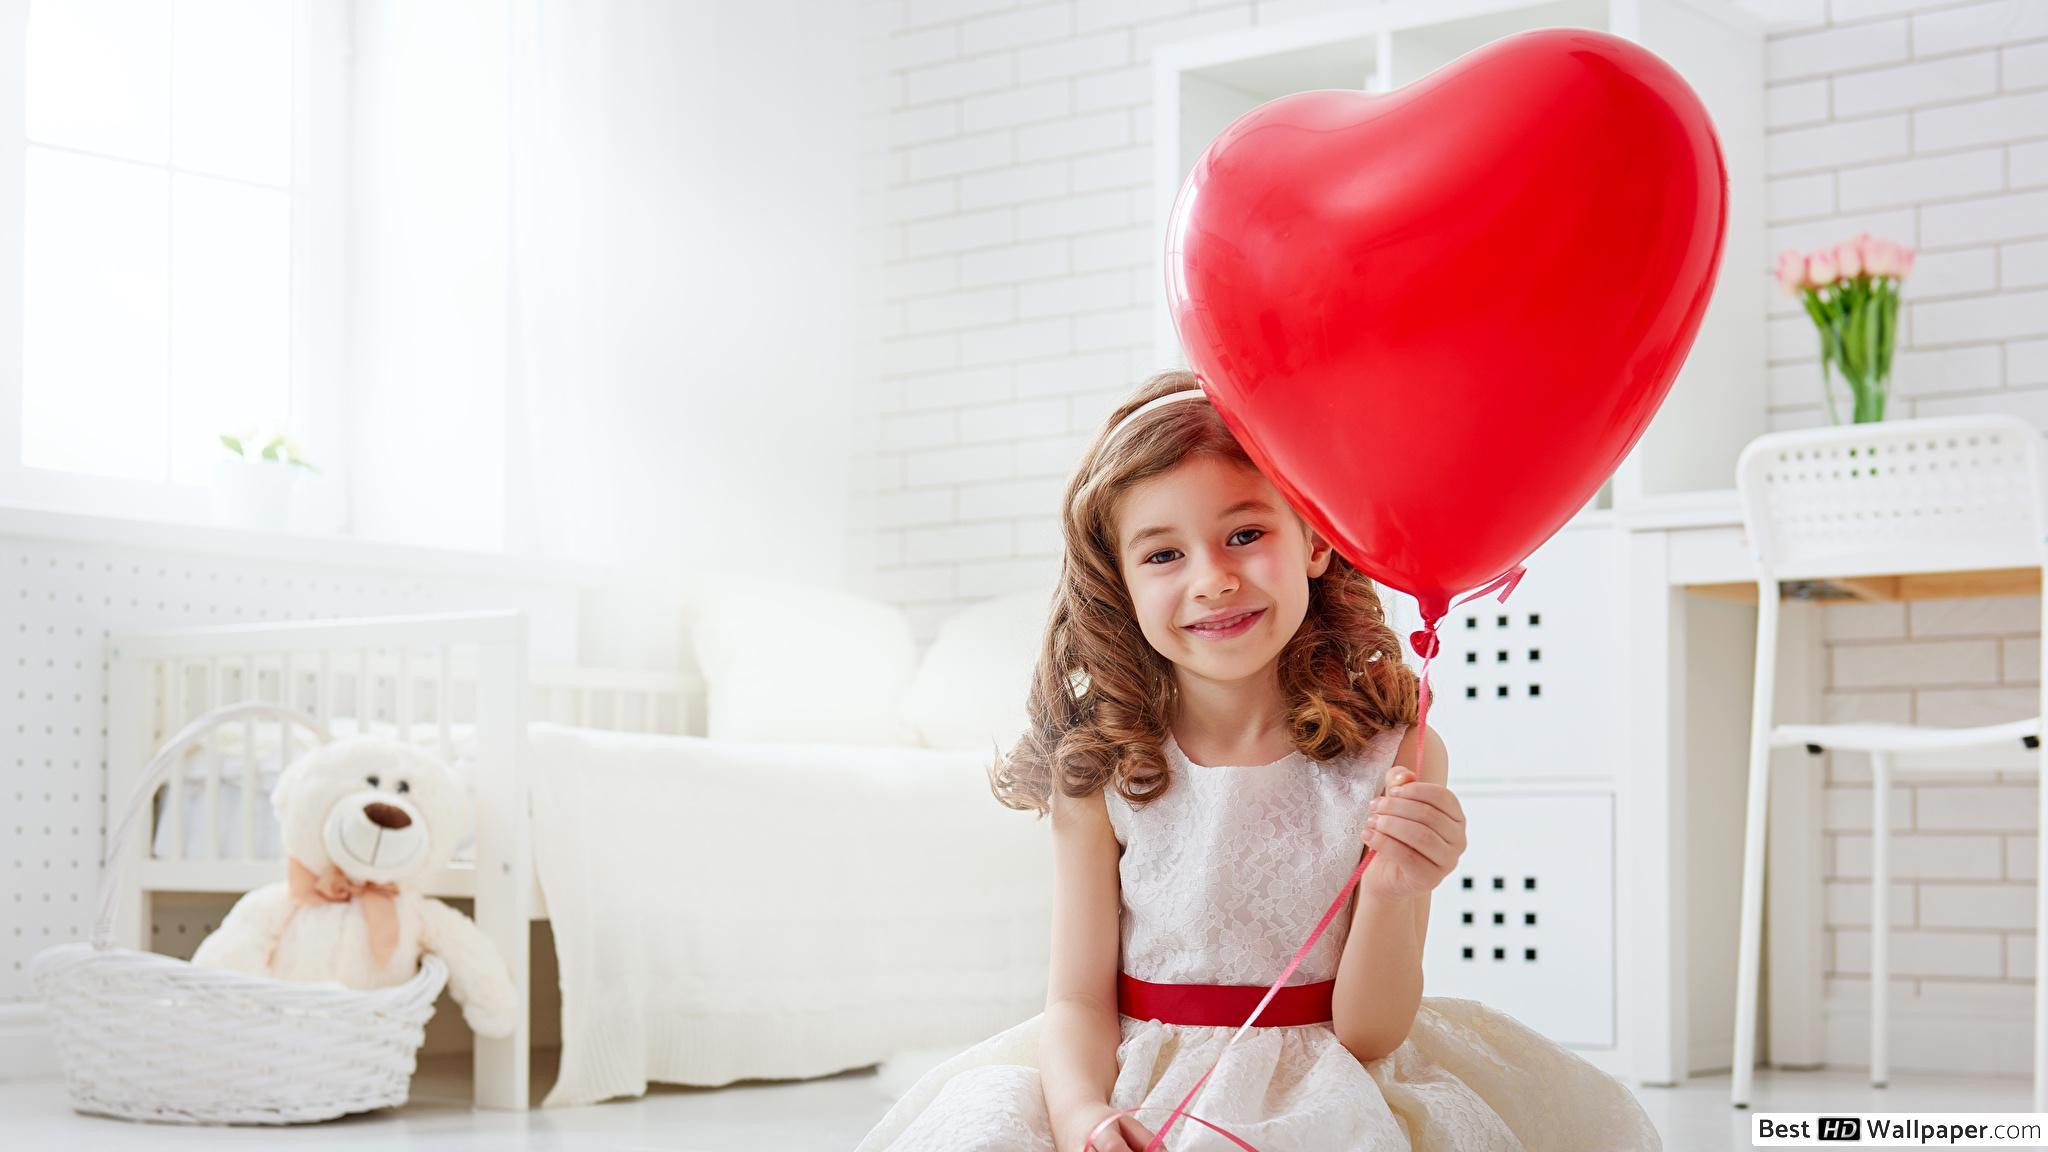 Valentine's day with the heart balloon HD wallpaper download